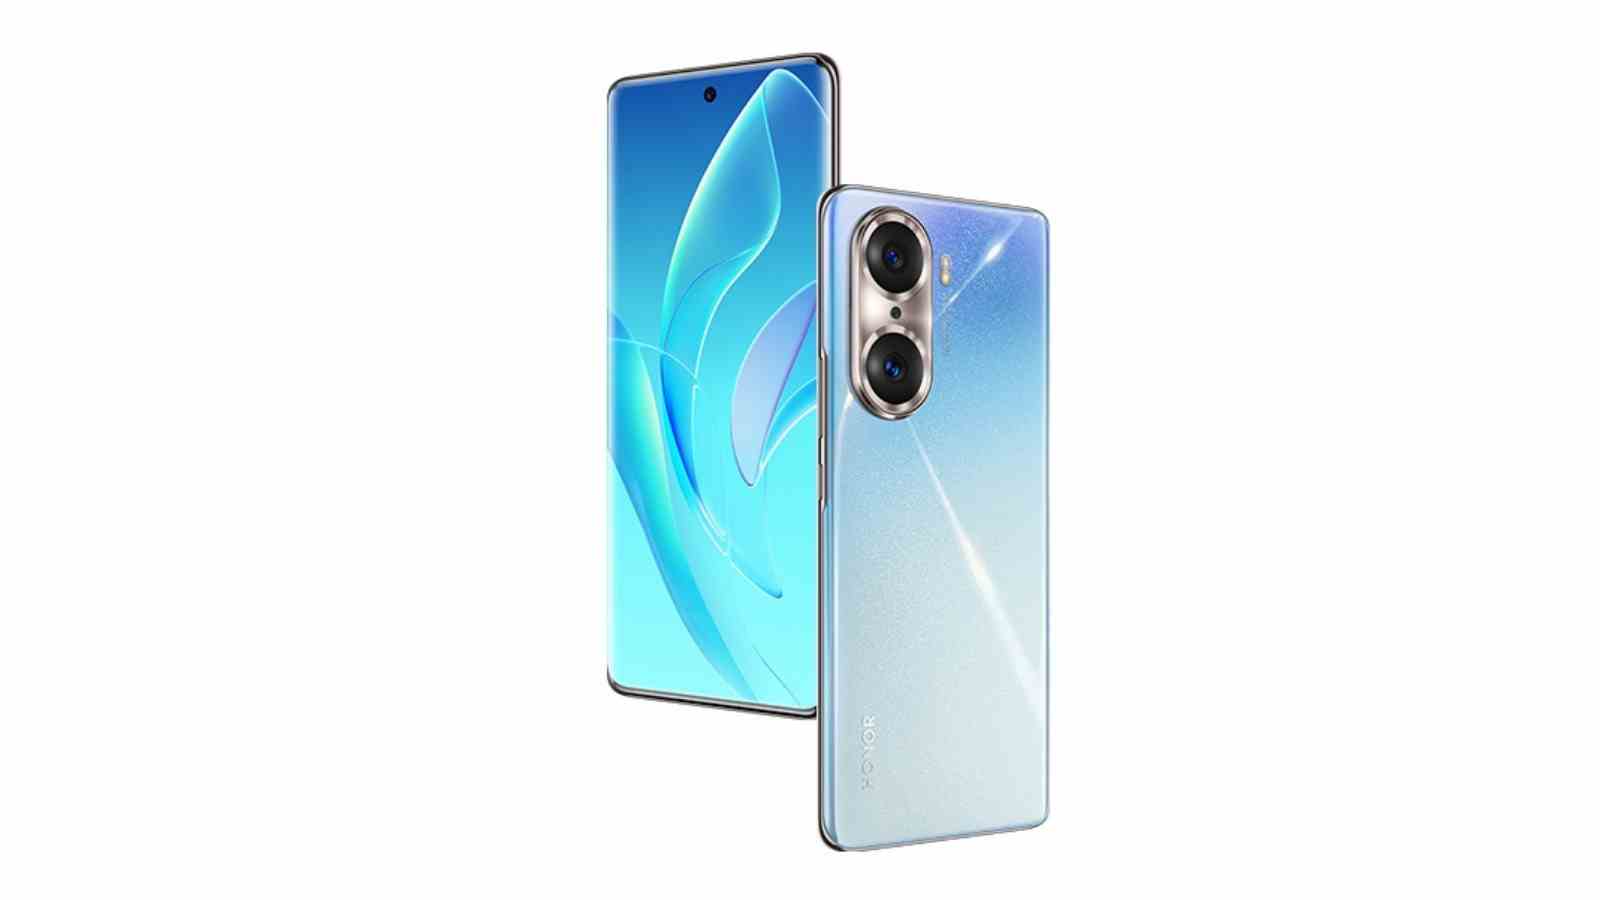 Honor 60 and Honor 60 Pro 5G with 108MP triple rear camera, 120Hz OLED display launched: Price, Specifications